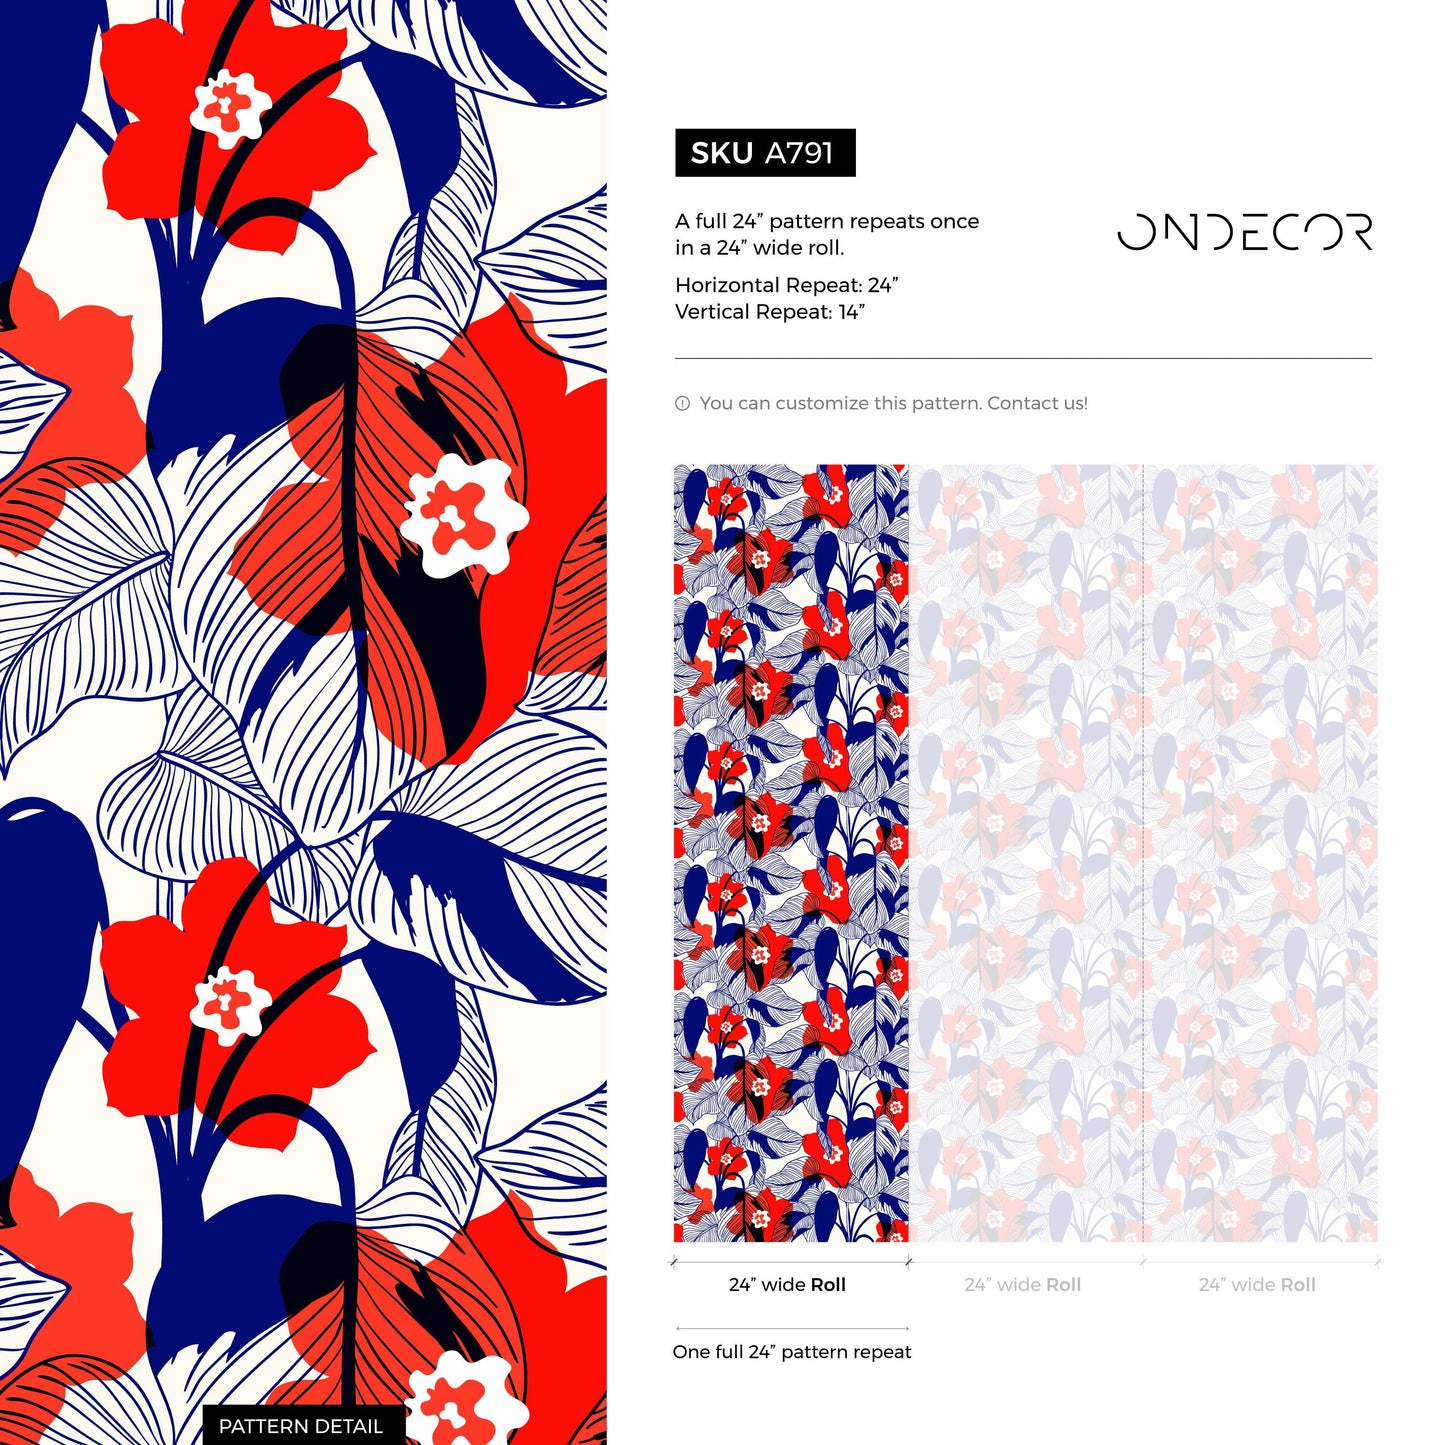 Floral Garden Wallpaper Blue and Red Wallpaper Peel and Stick and Traditional Wallpaper - CC - A791